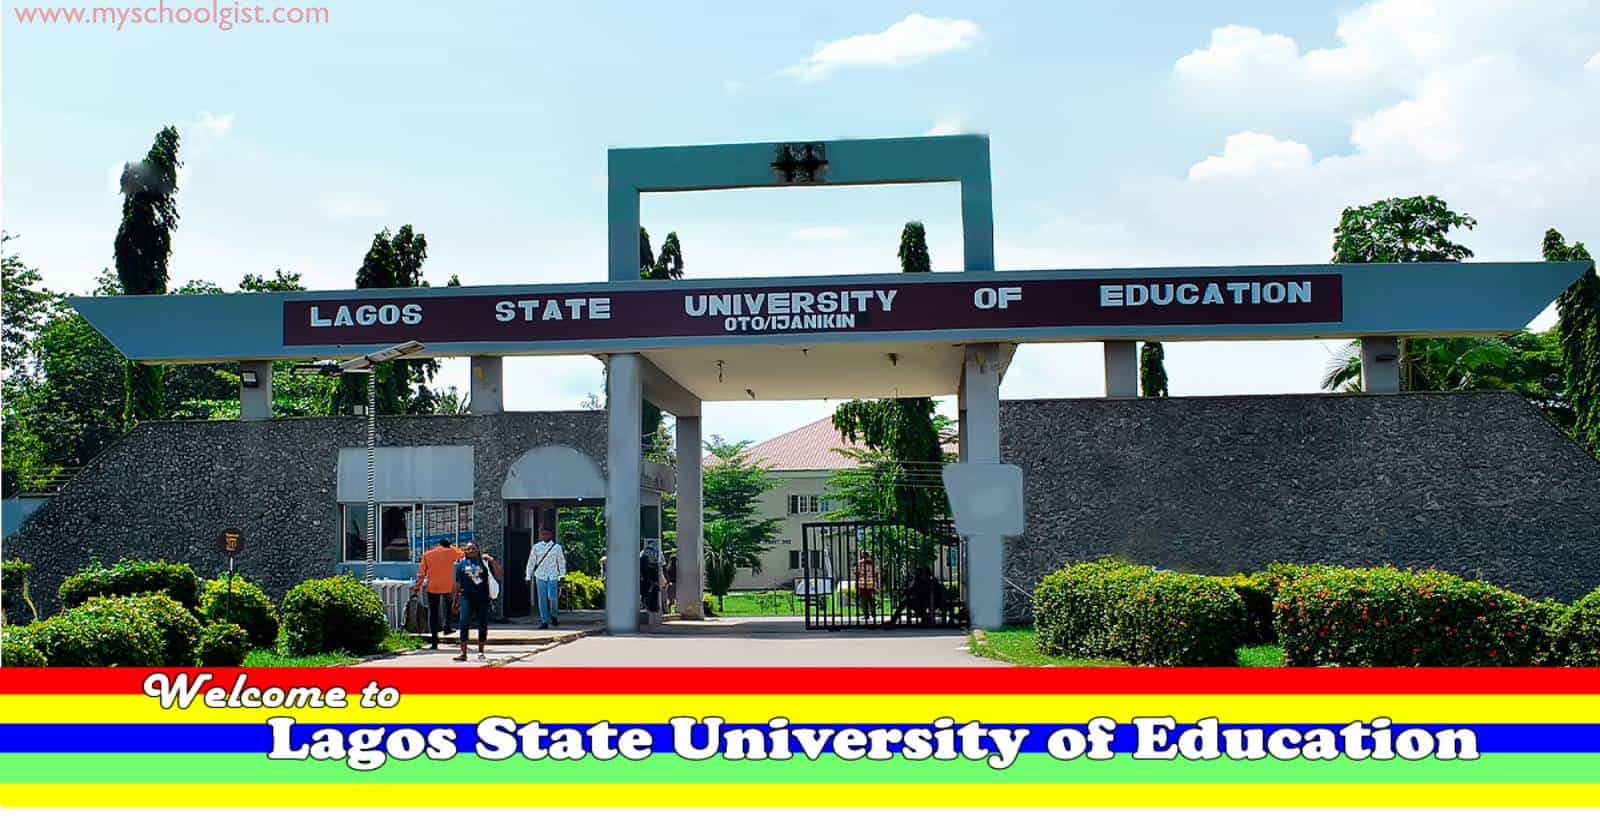 Lagos State University of Education Admission Policy